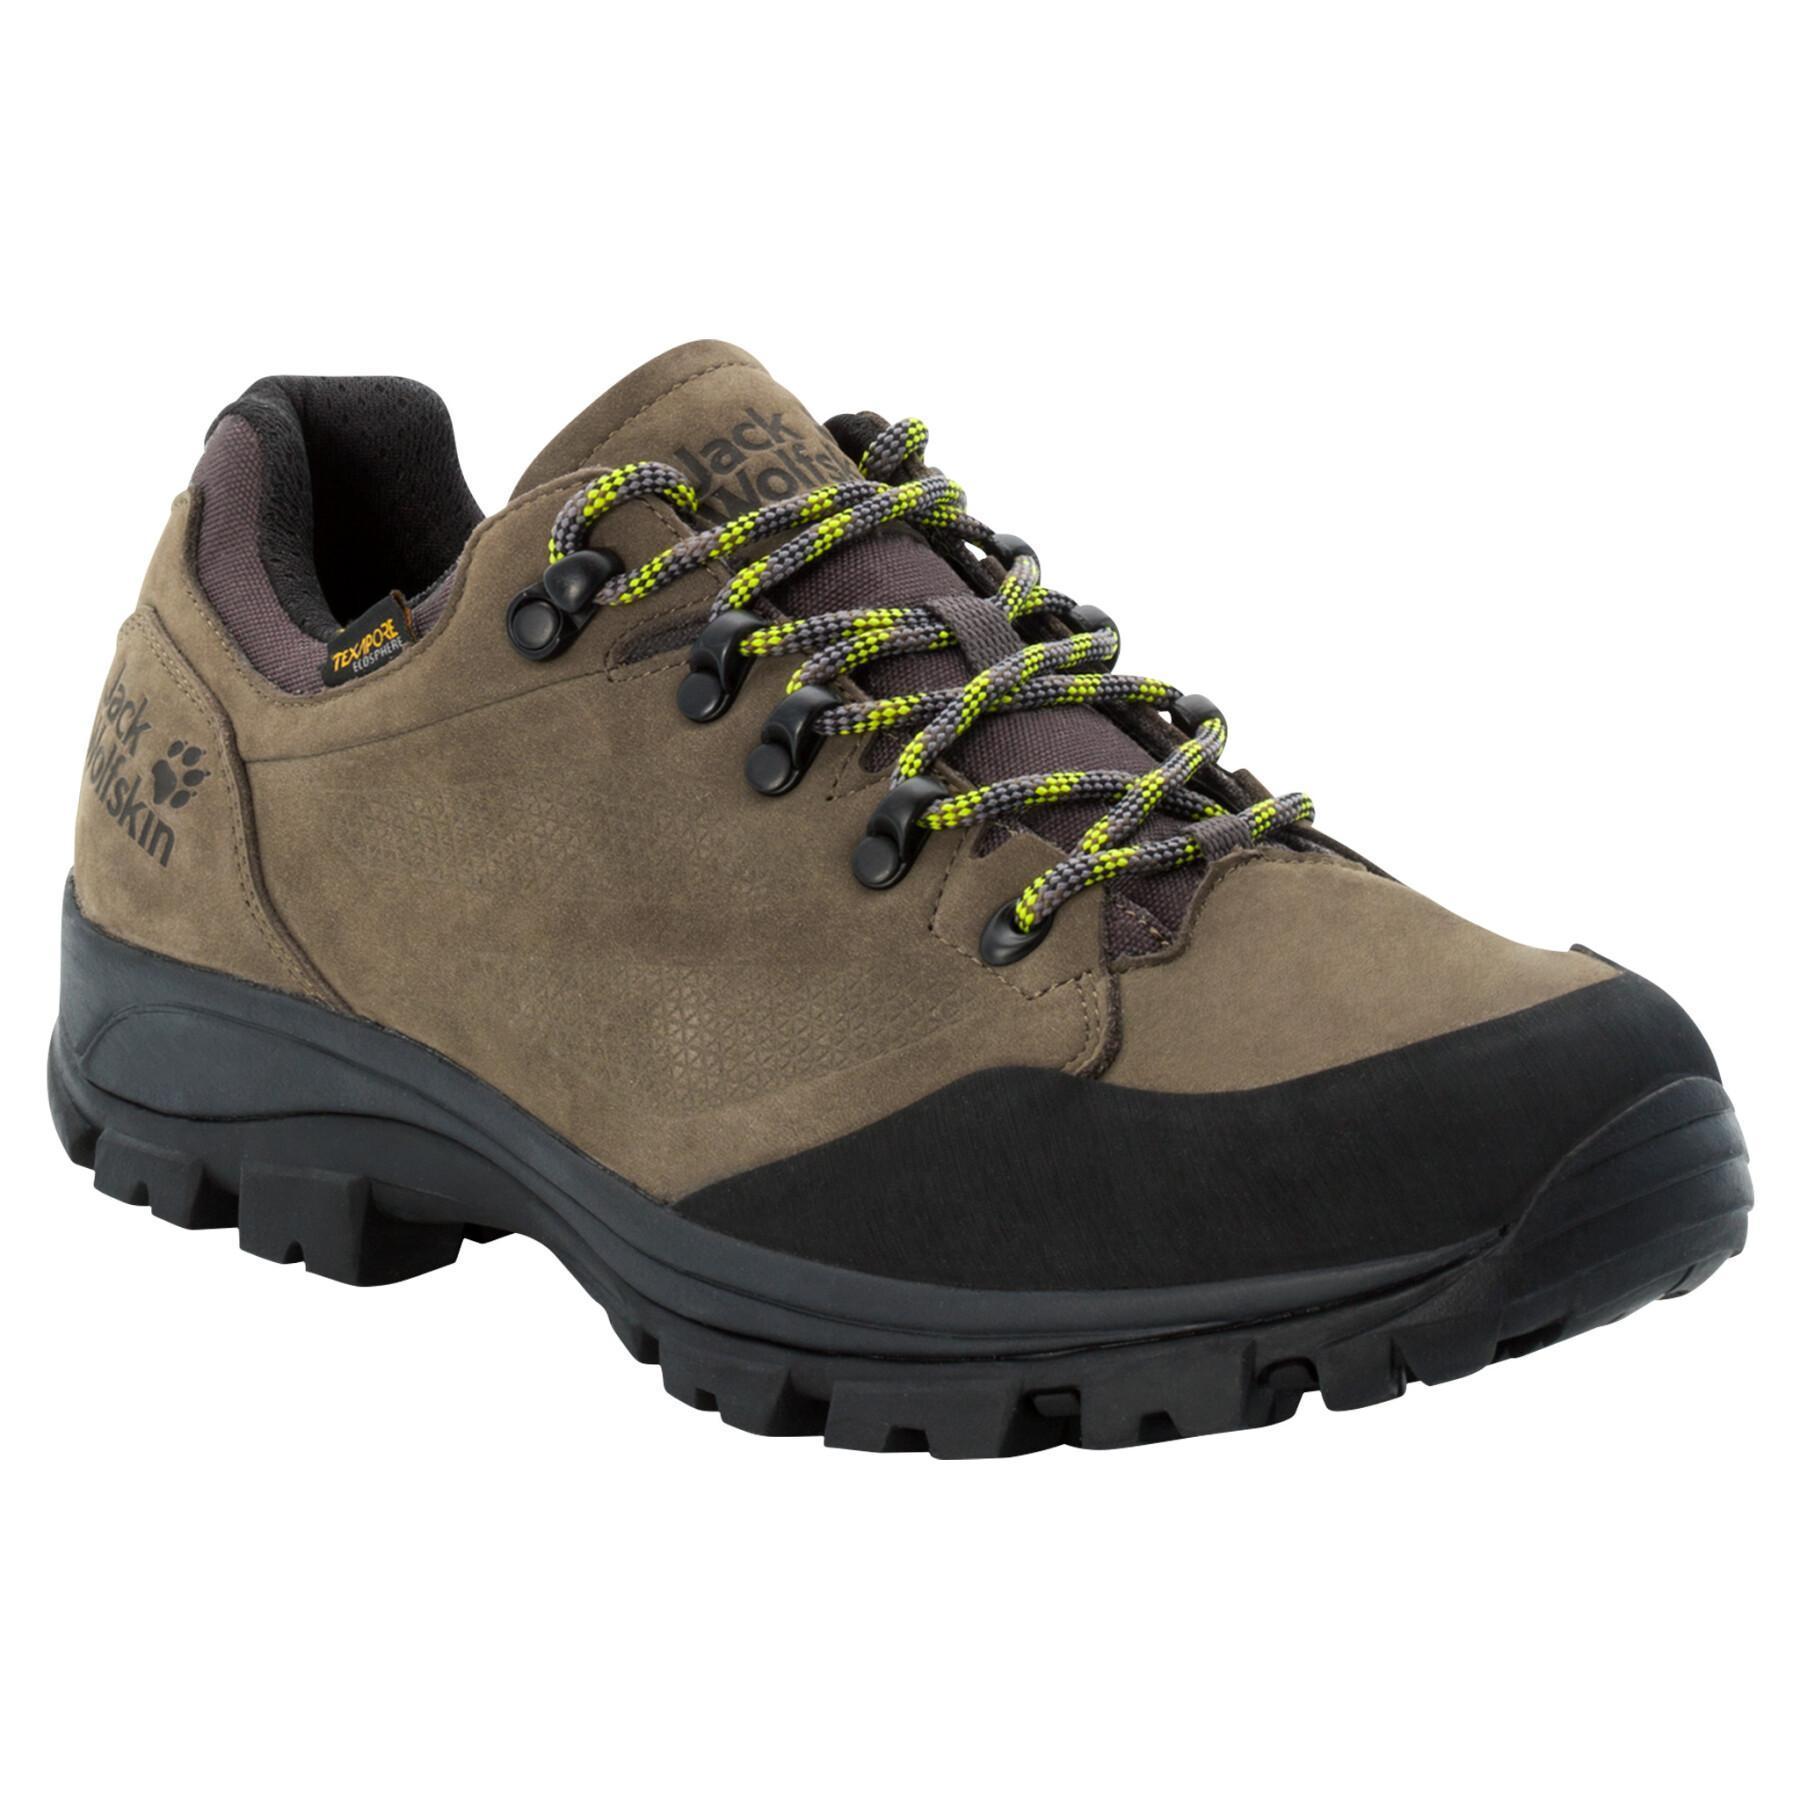 Hiking shoes Jack Wolfskin Rebellion Texapore GT